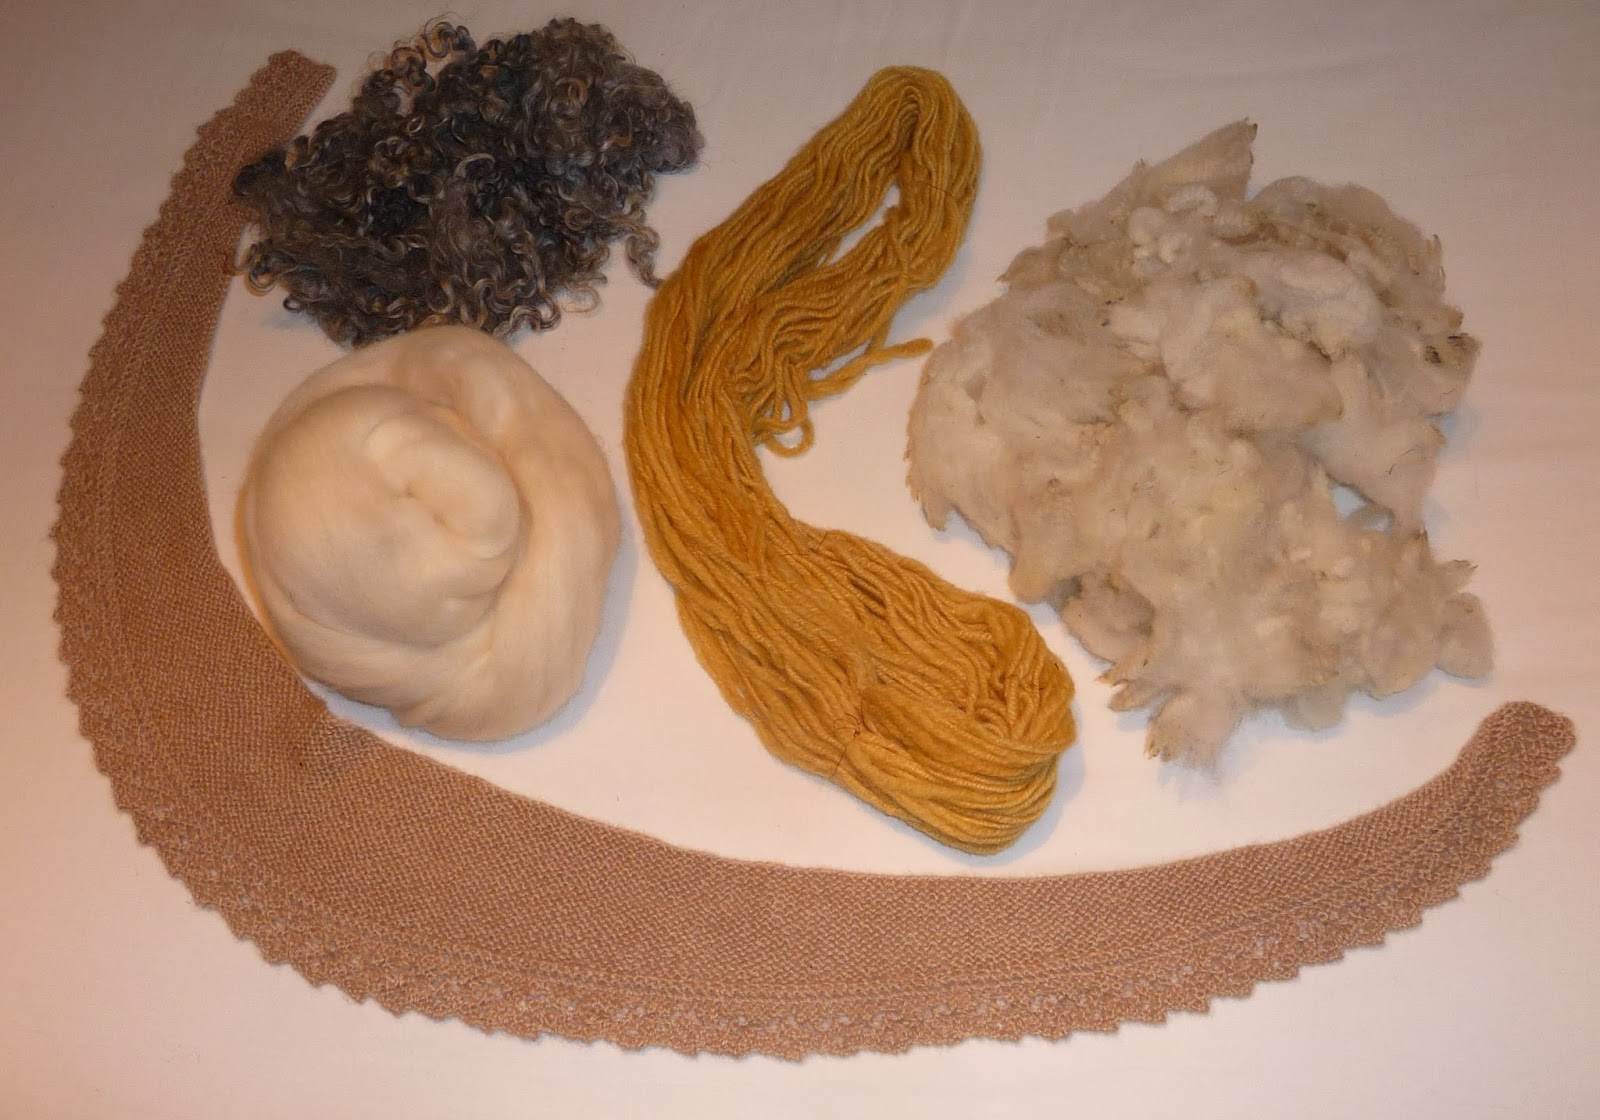 Wool - Tribulations of Hand Spinning and Herbal Dyeing: Dyed in the